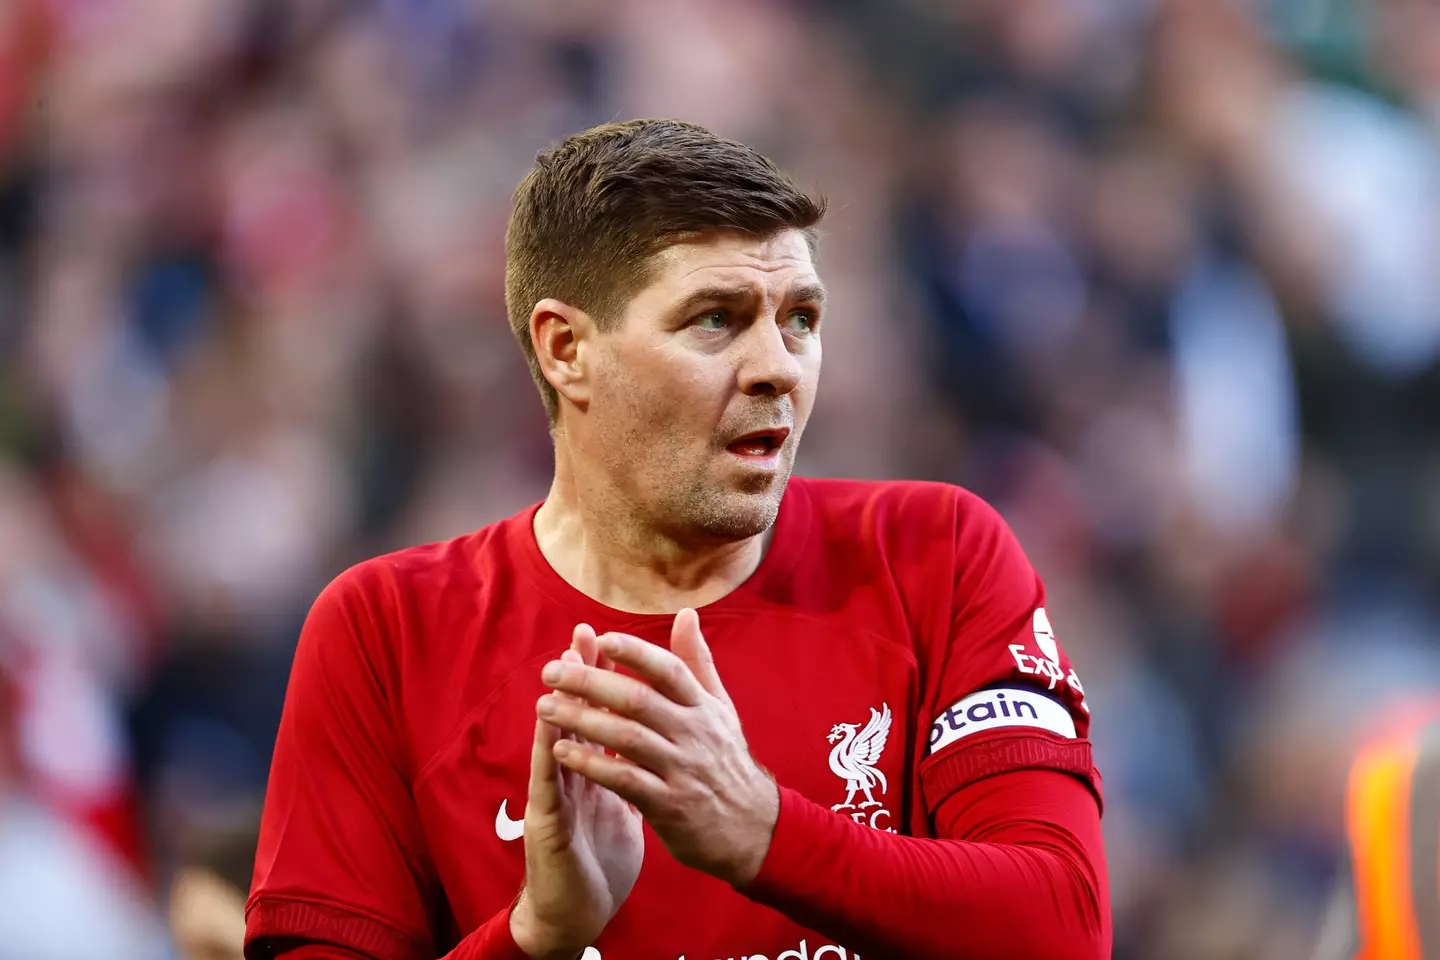 Gerrard captained Liverpool Legedns to a victory against Celtic Legends. (